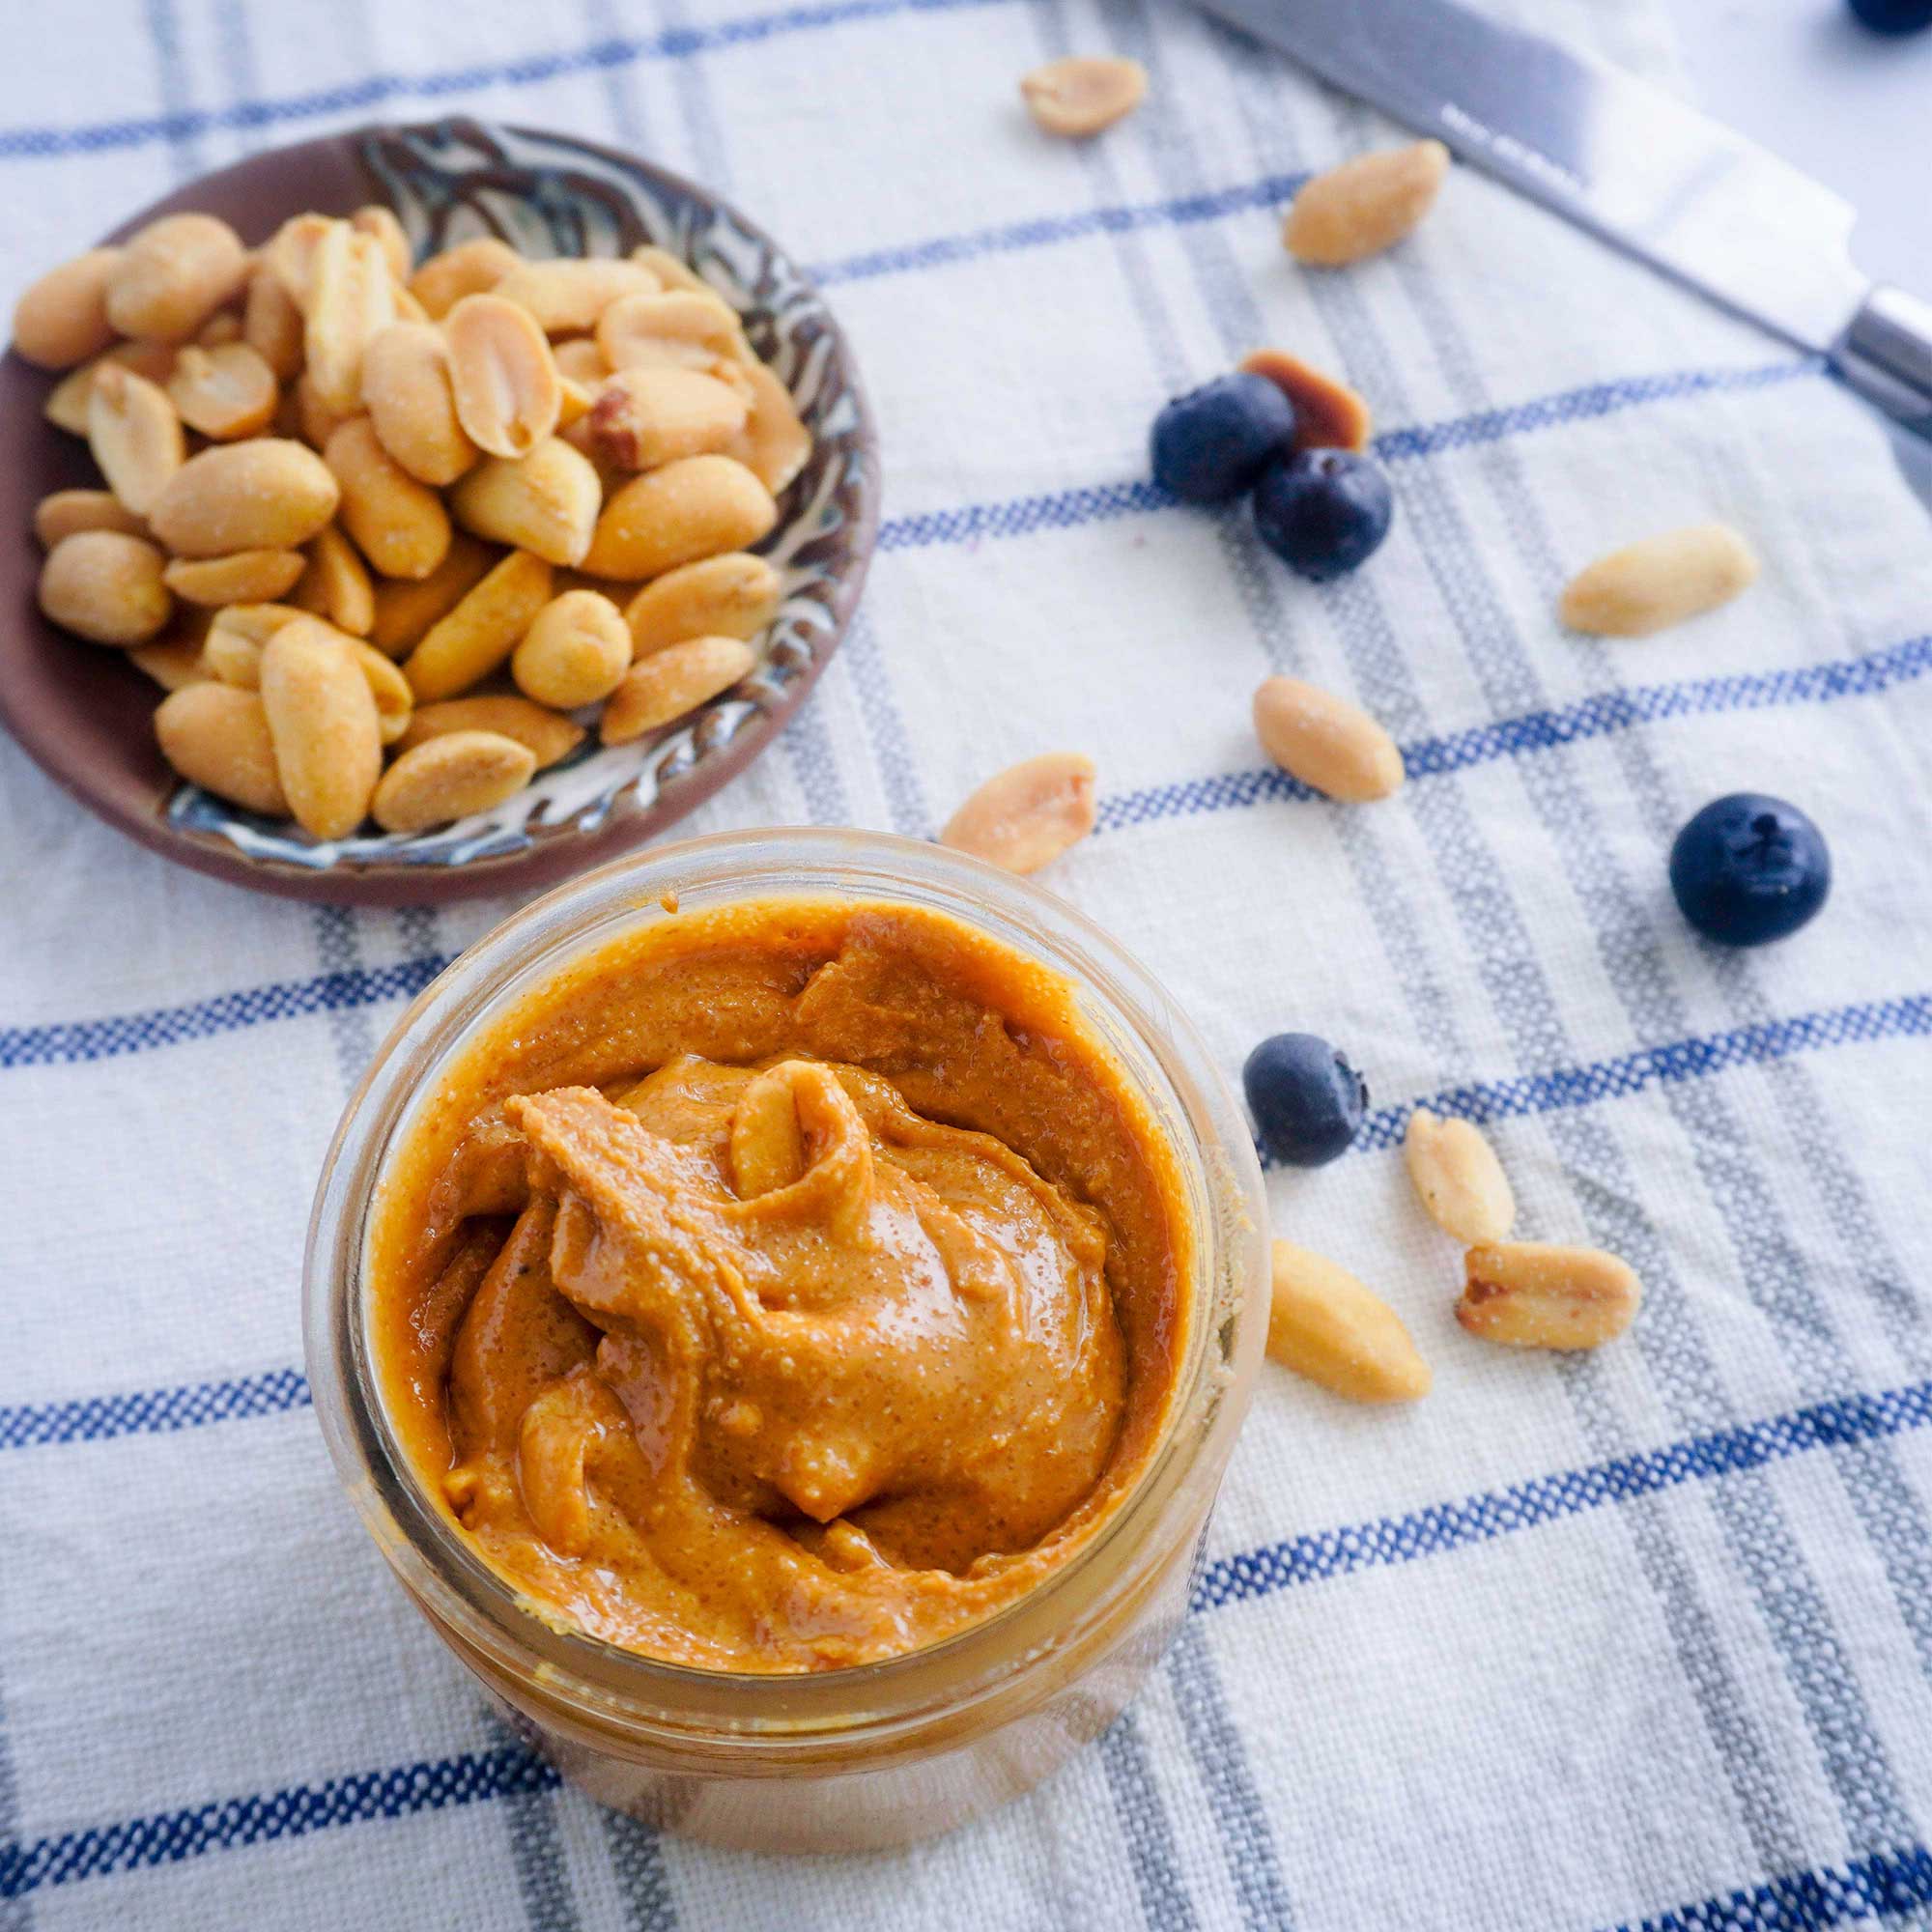 How To Make Homemade Peanut Butter